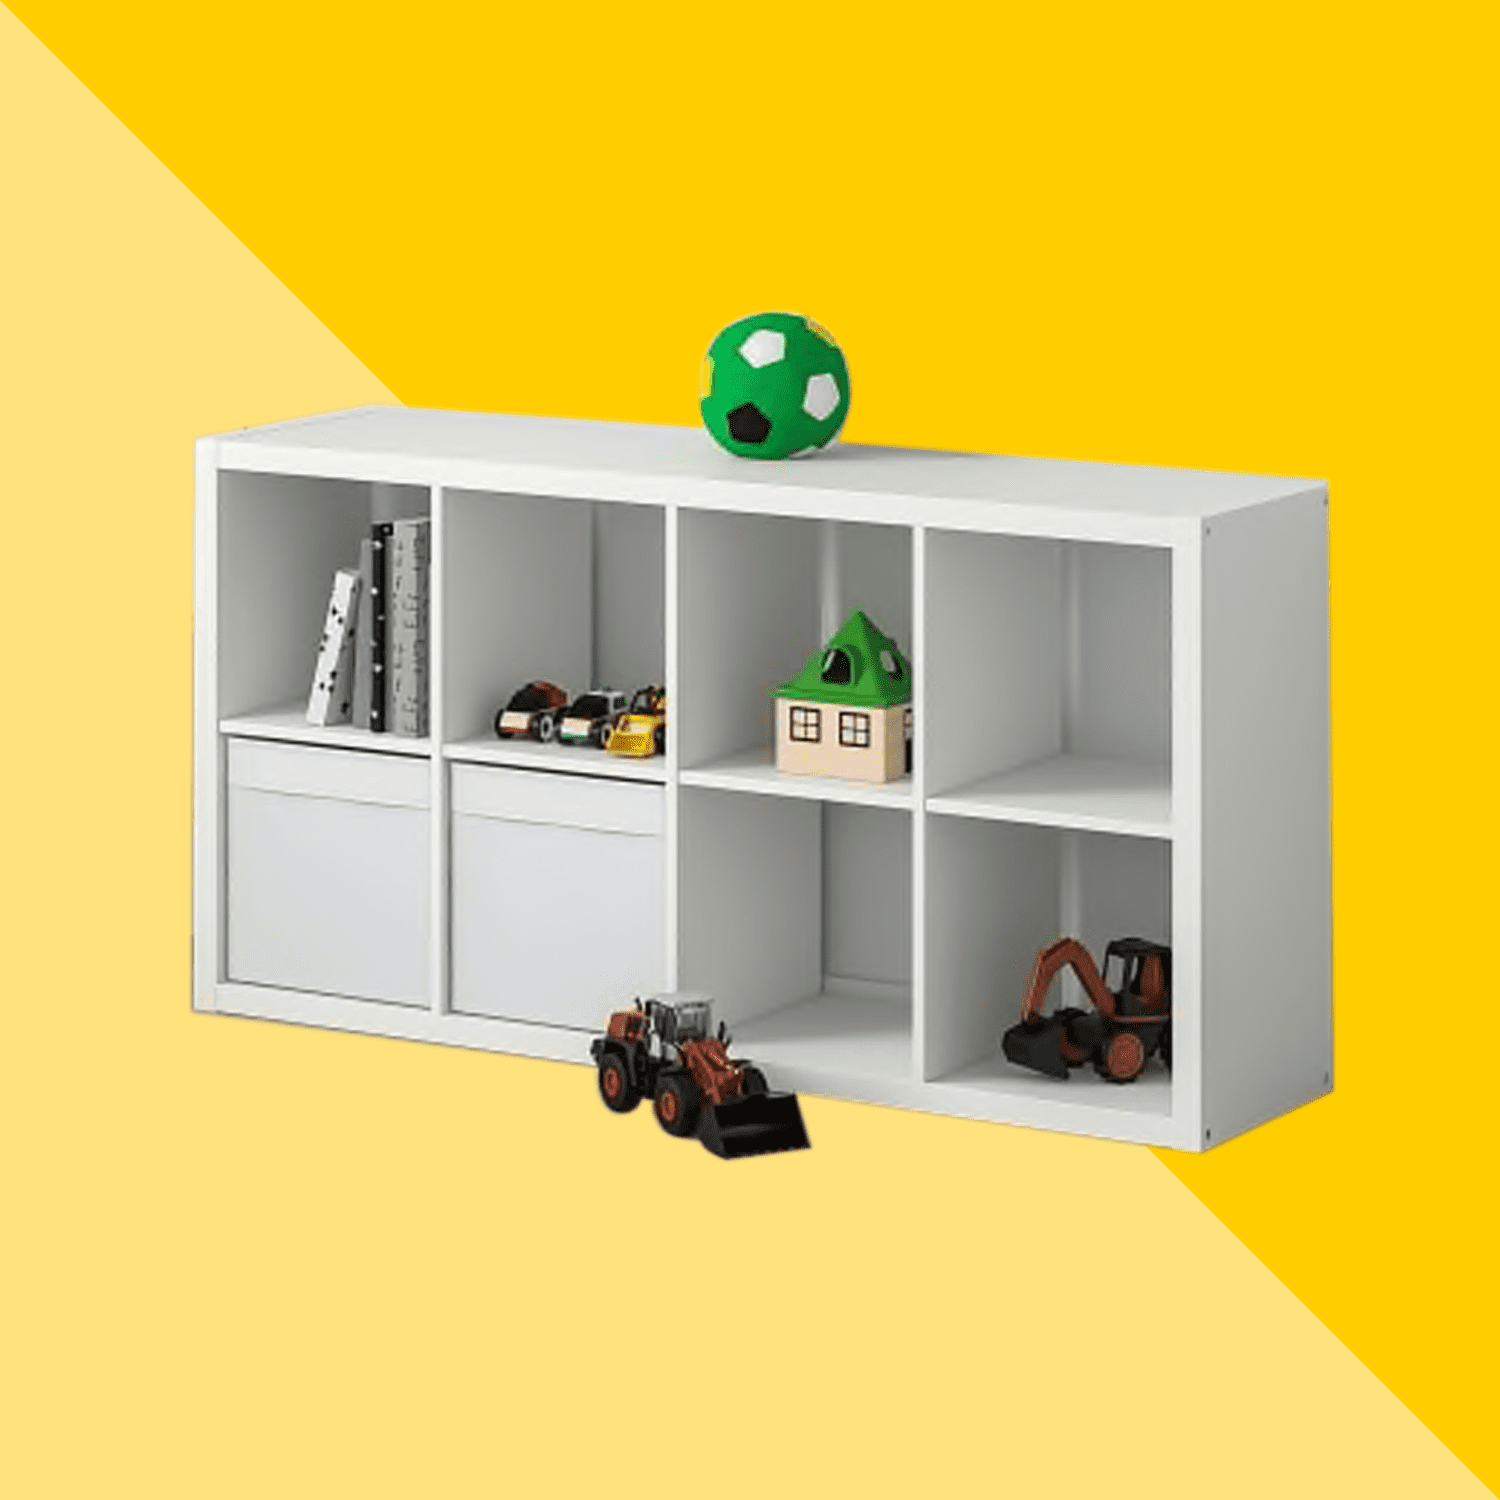 One Crazy Mom -  10+  Ideas for Board Game Storage. 🥳🥳🥳 We have over 10 board game storage  ideas that will help get your games organized. Make game night even more